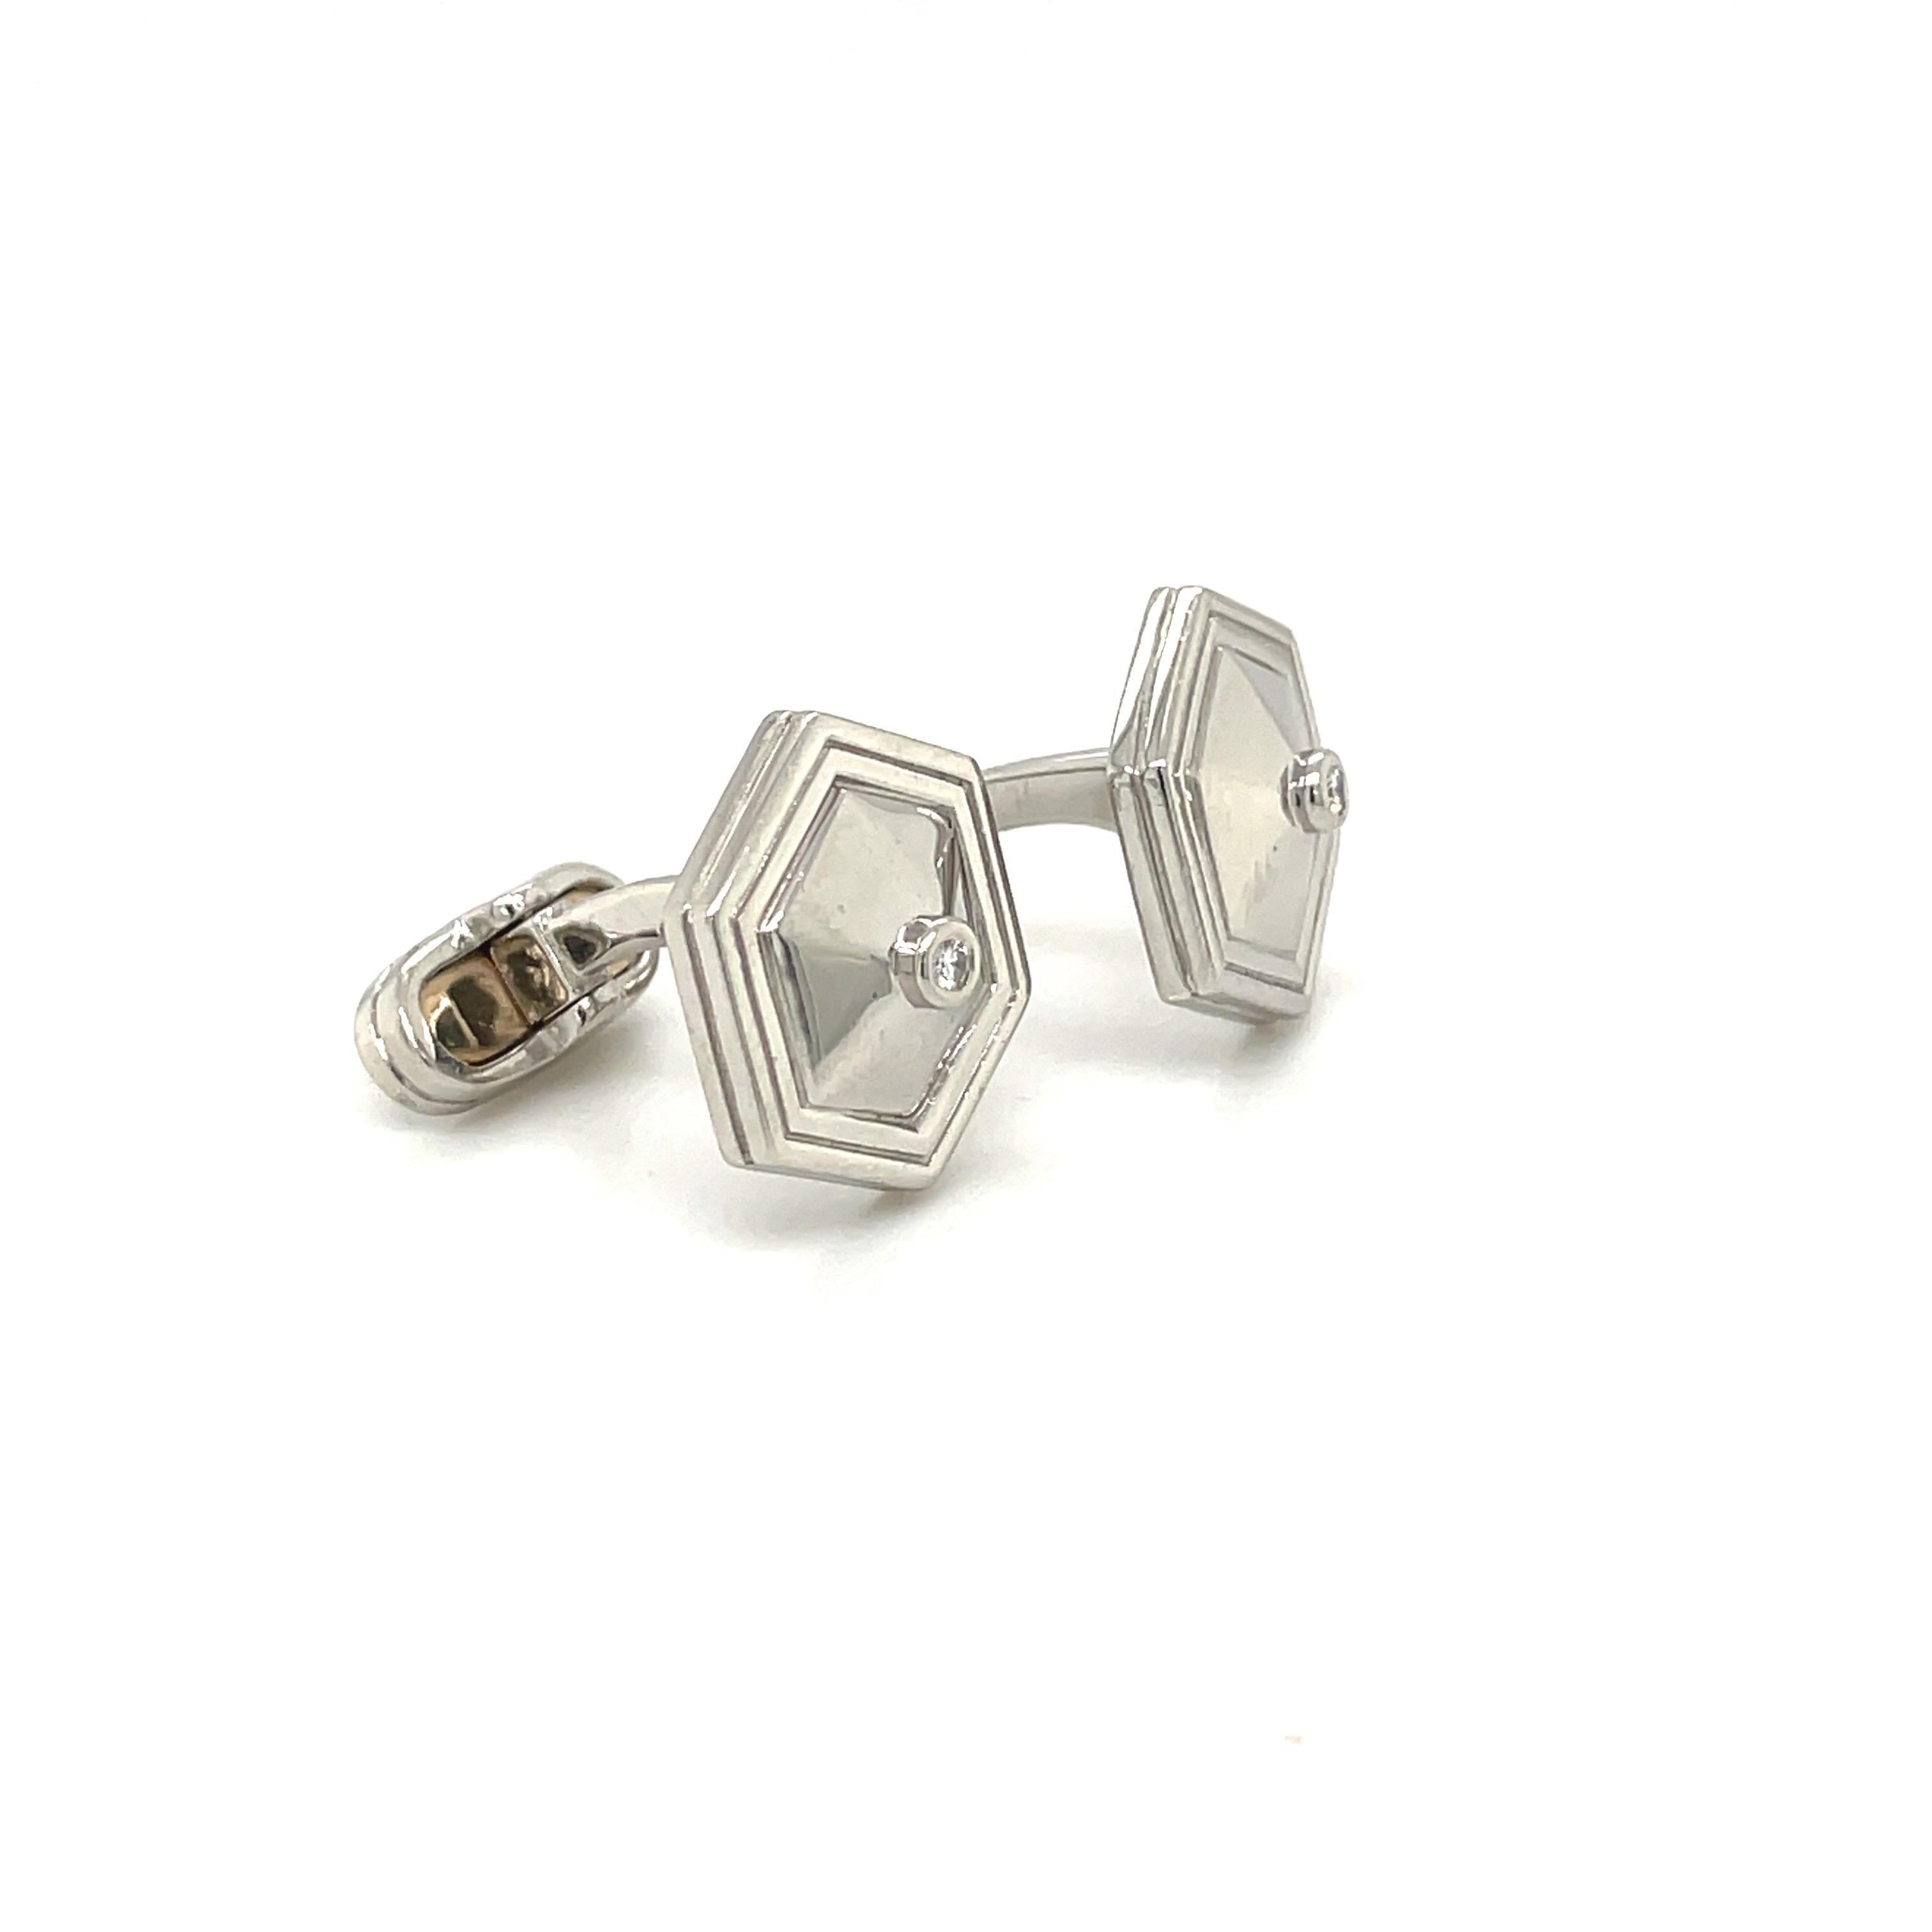 Classic platinum cuff links in a hexagon shape with bezel set round diamond centers. The hexagons measure 14.5 mm in diameter.
Signed Mattis Plat